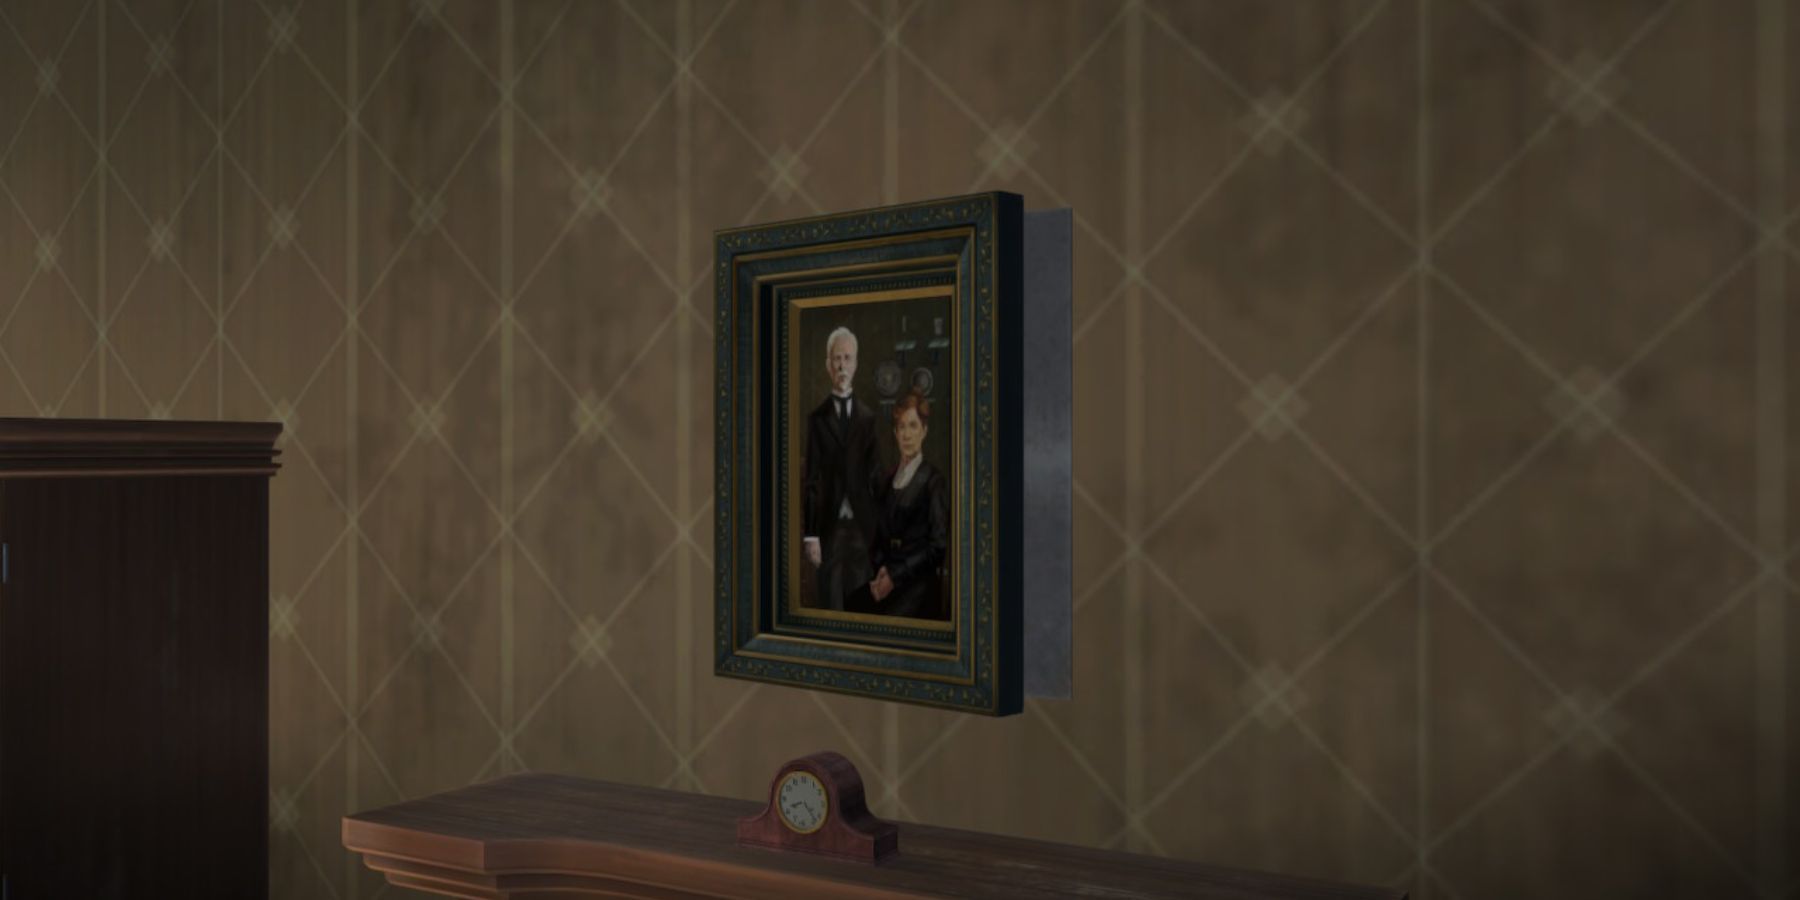 Another Code: Recollection - How to Open the Safe in the Butler's Room